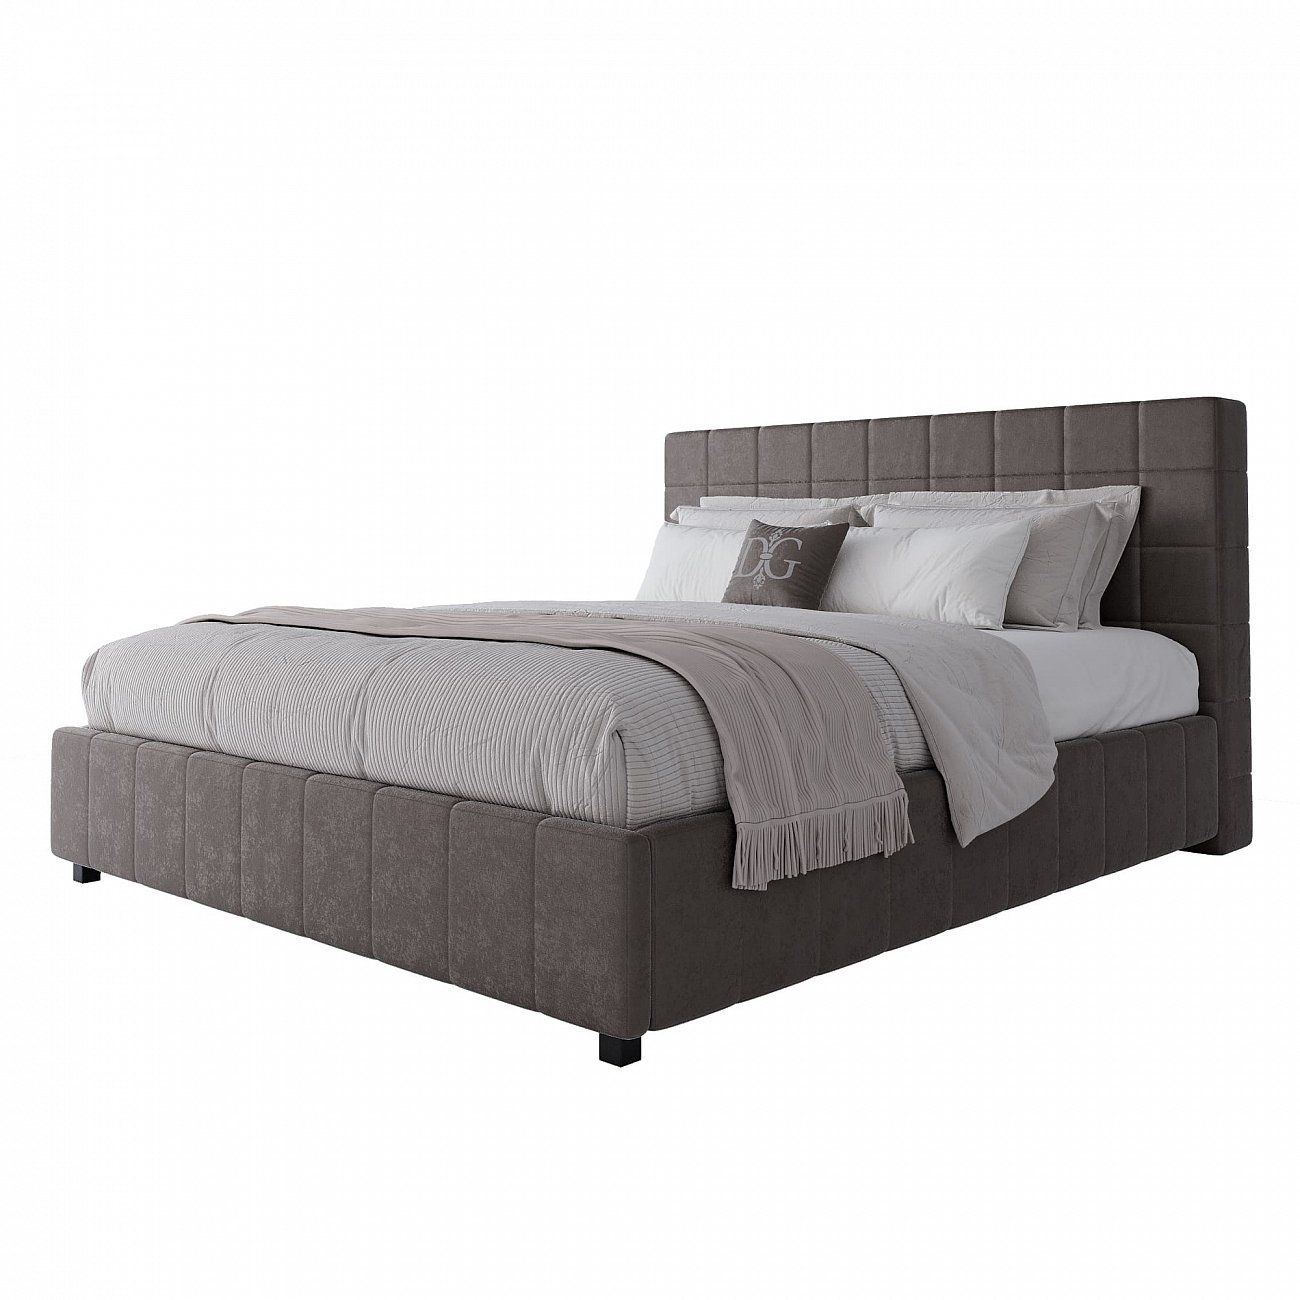 Double bed 180x200 cm gray-brown Shining Modern